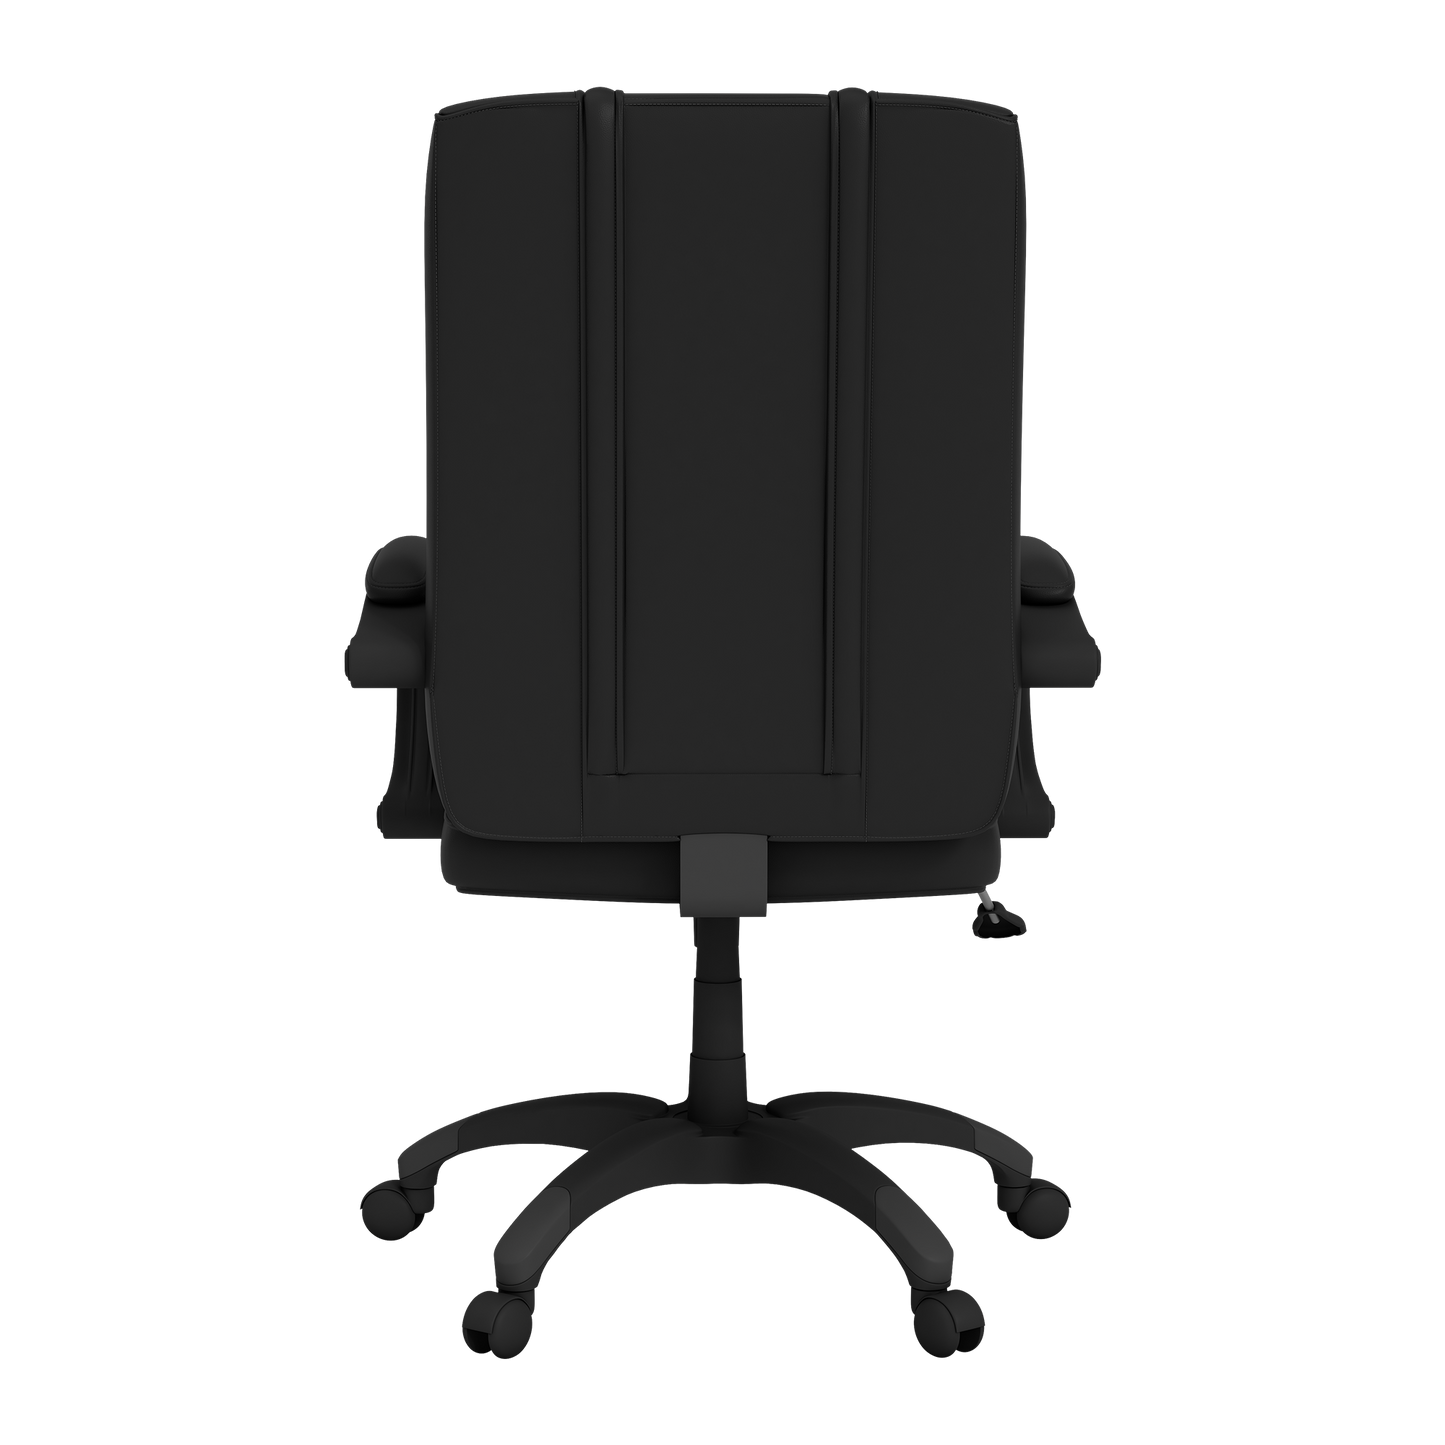 Office Chair 1000 with Miami Hurricanes Logo